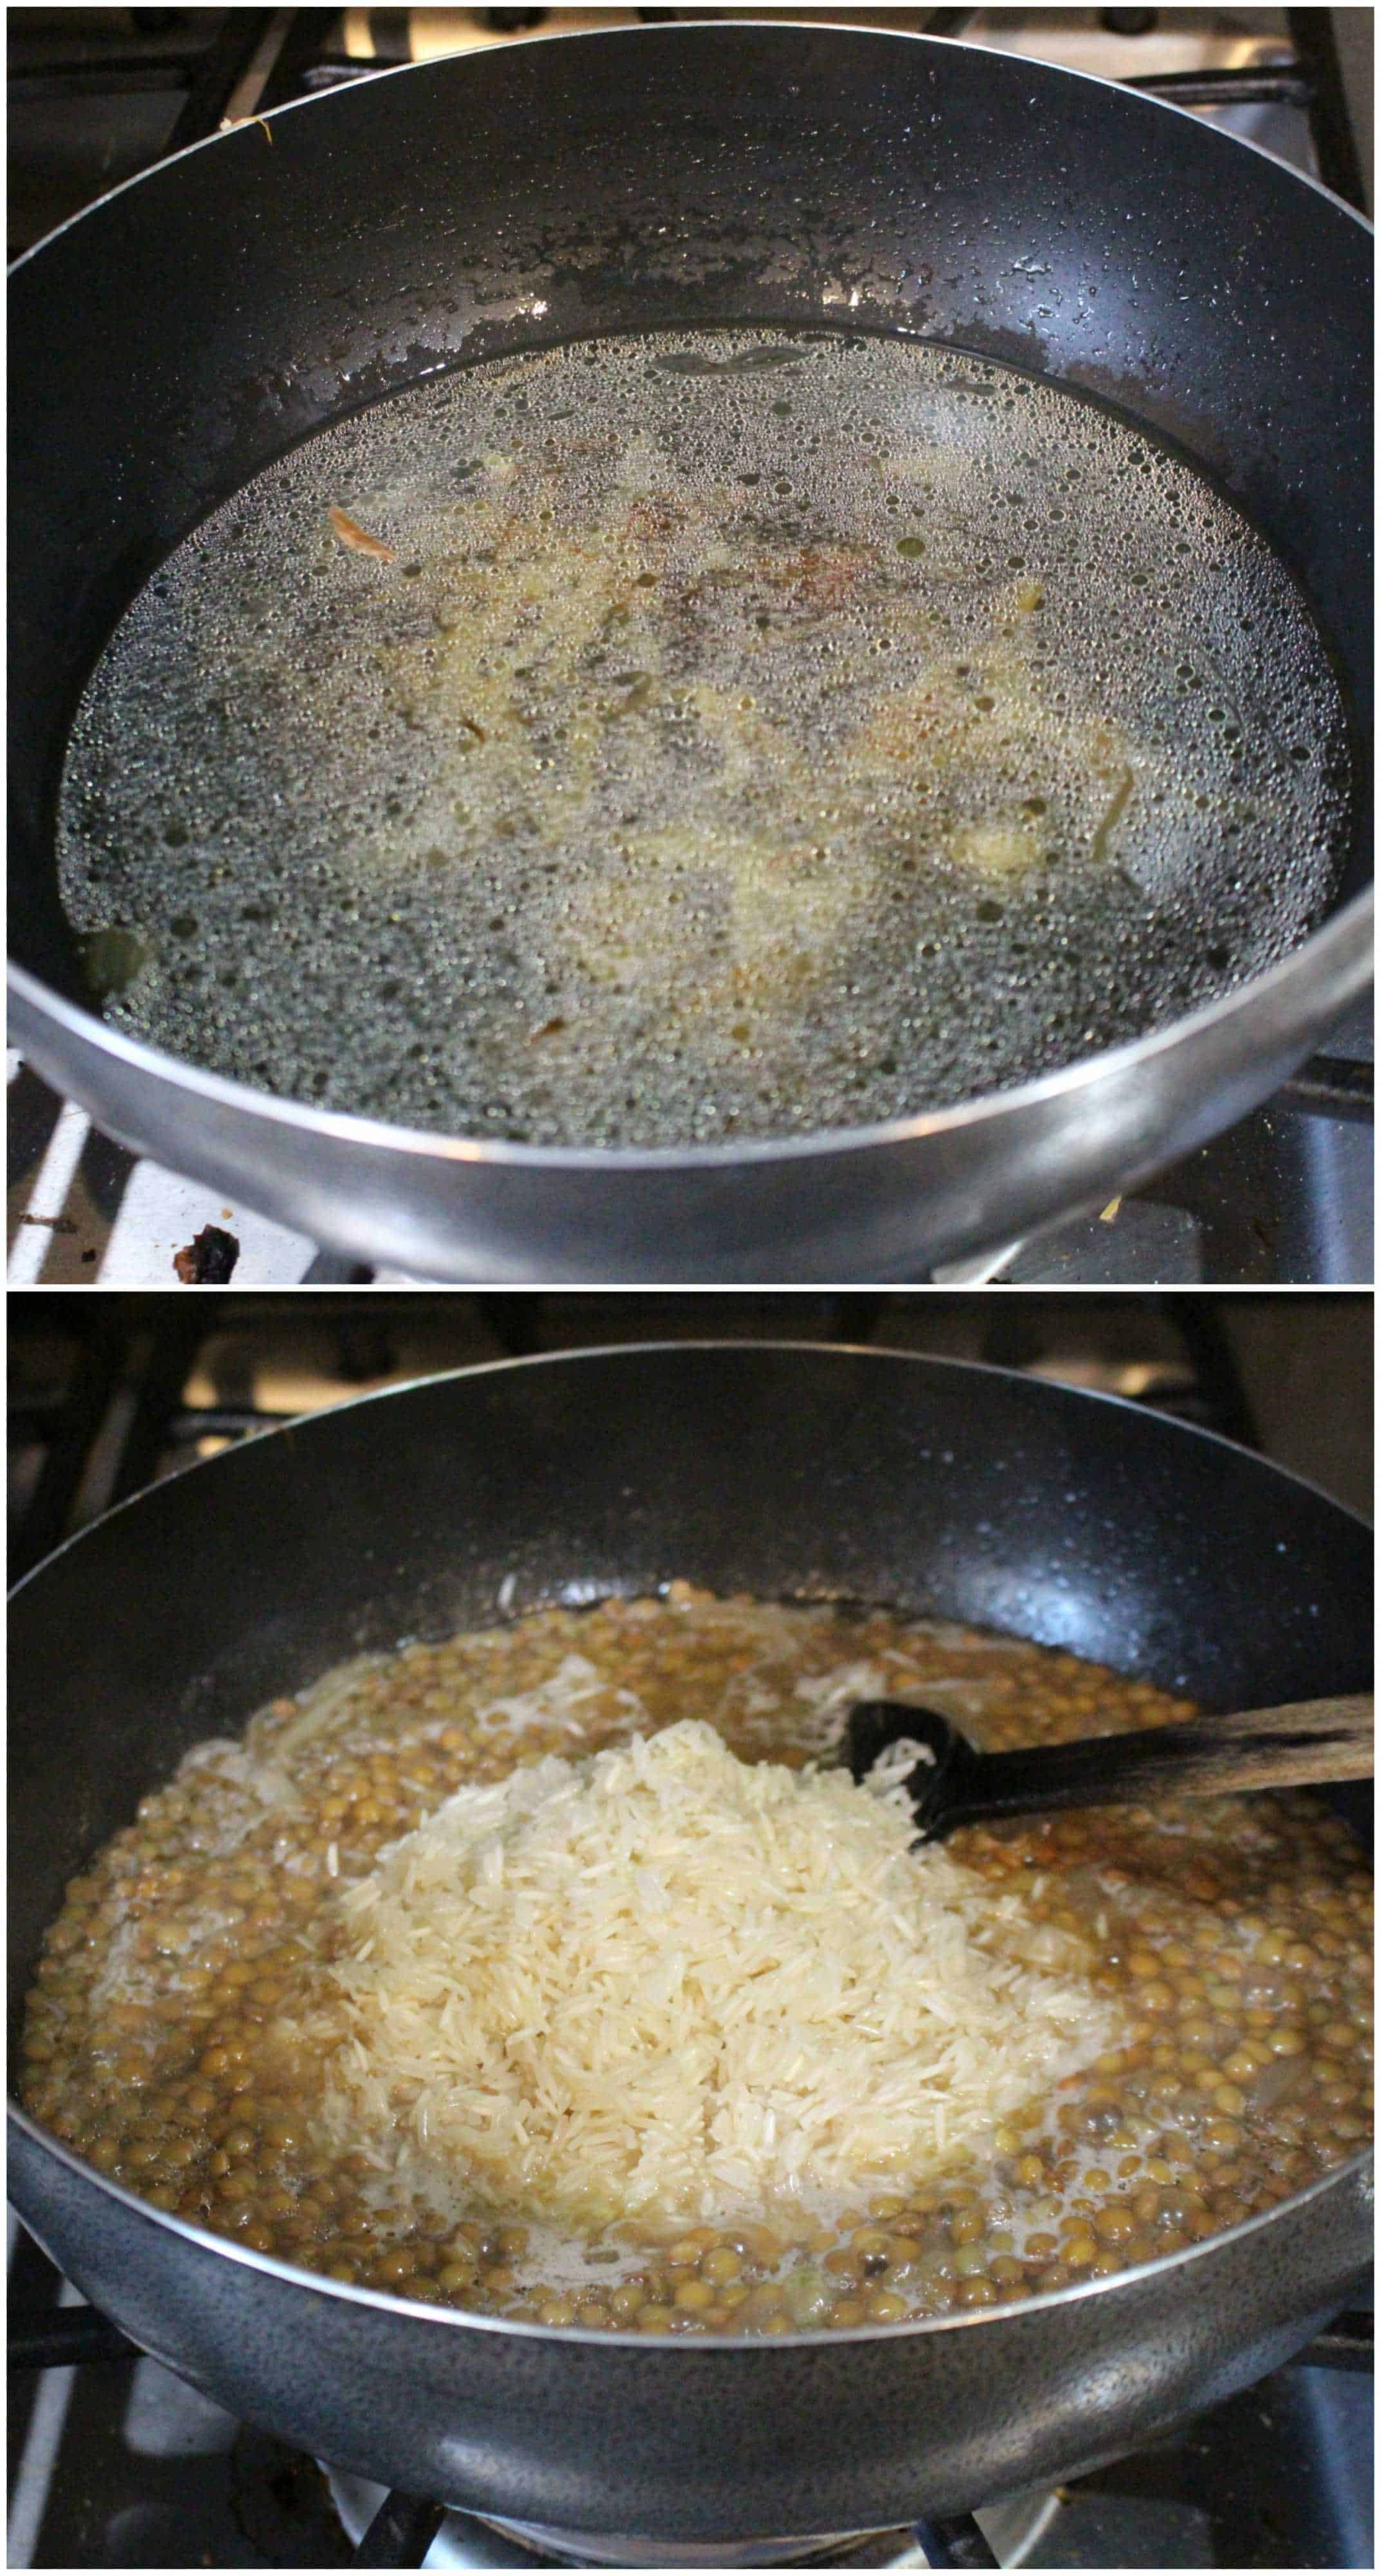 cooking the rice and lentils